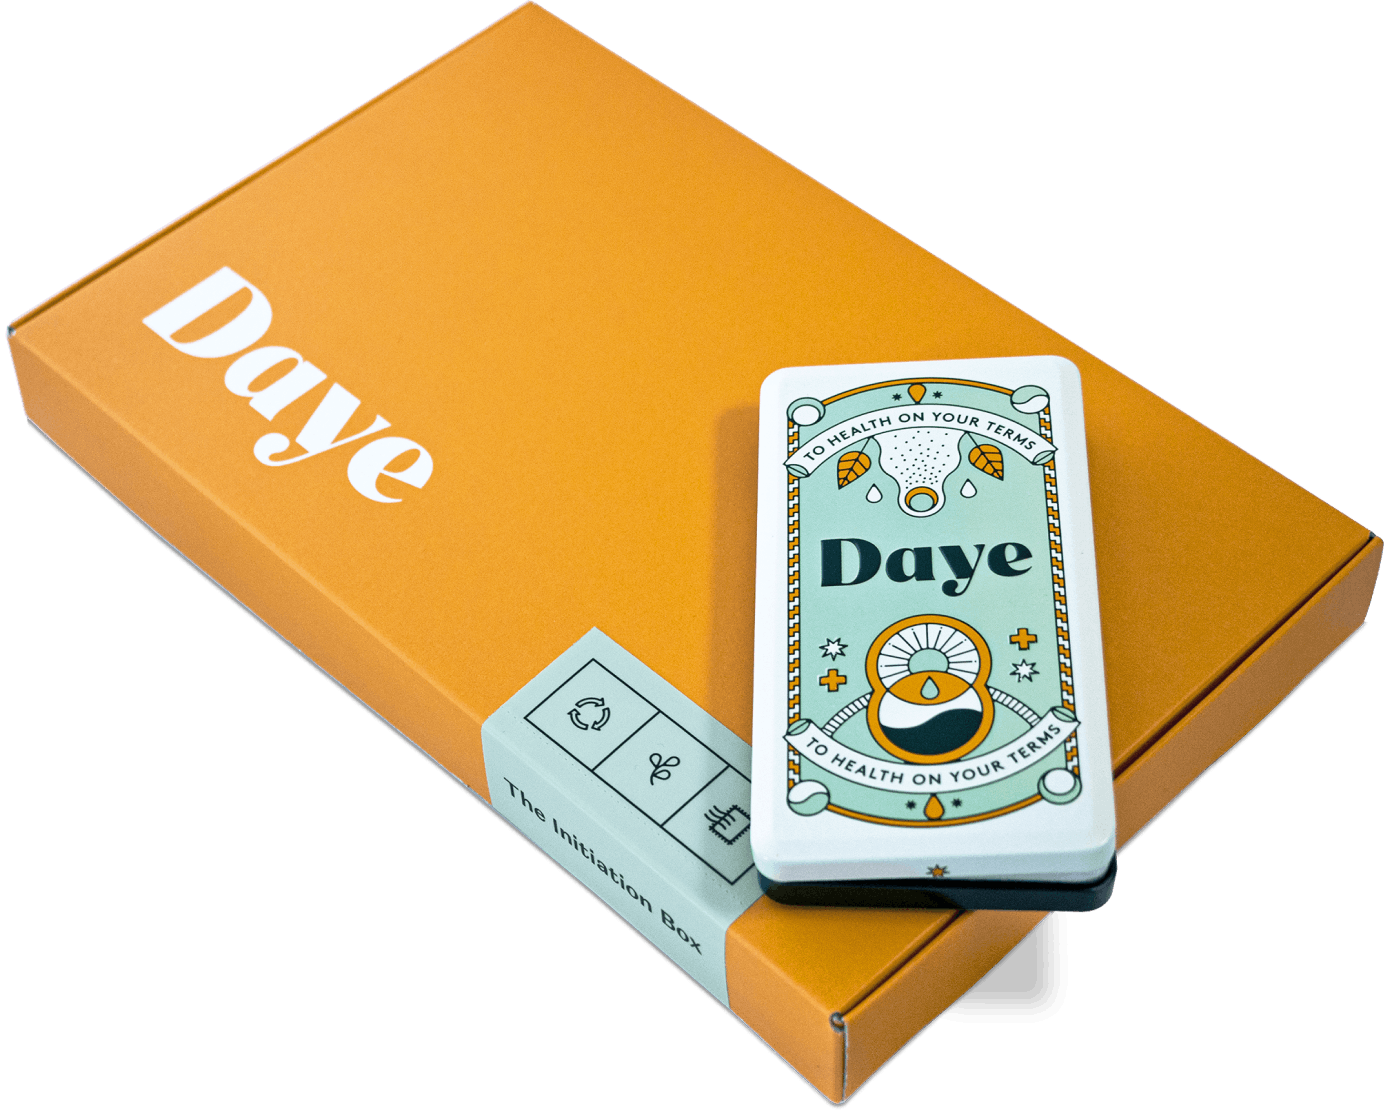 An eco-friendly, compostable orange cardboard box with pain-relieving, sustainable Daye tampons and an endlessly recyclable aluminium tin to store your tampons on the go